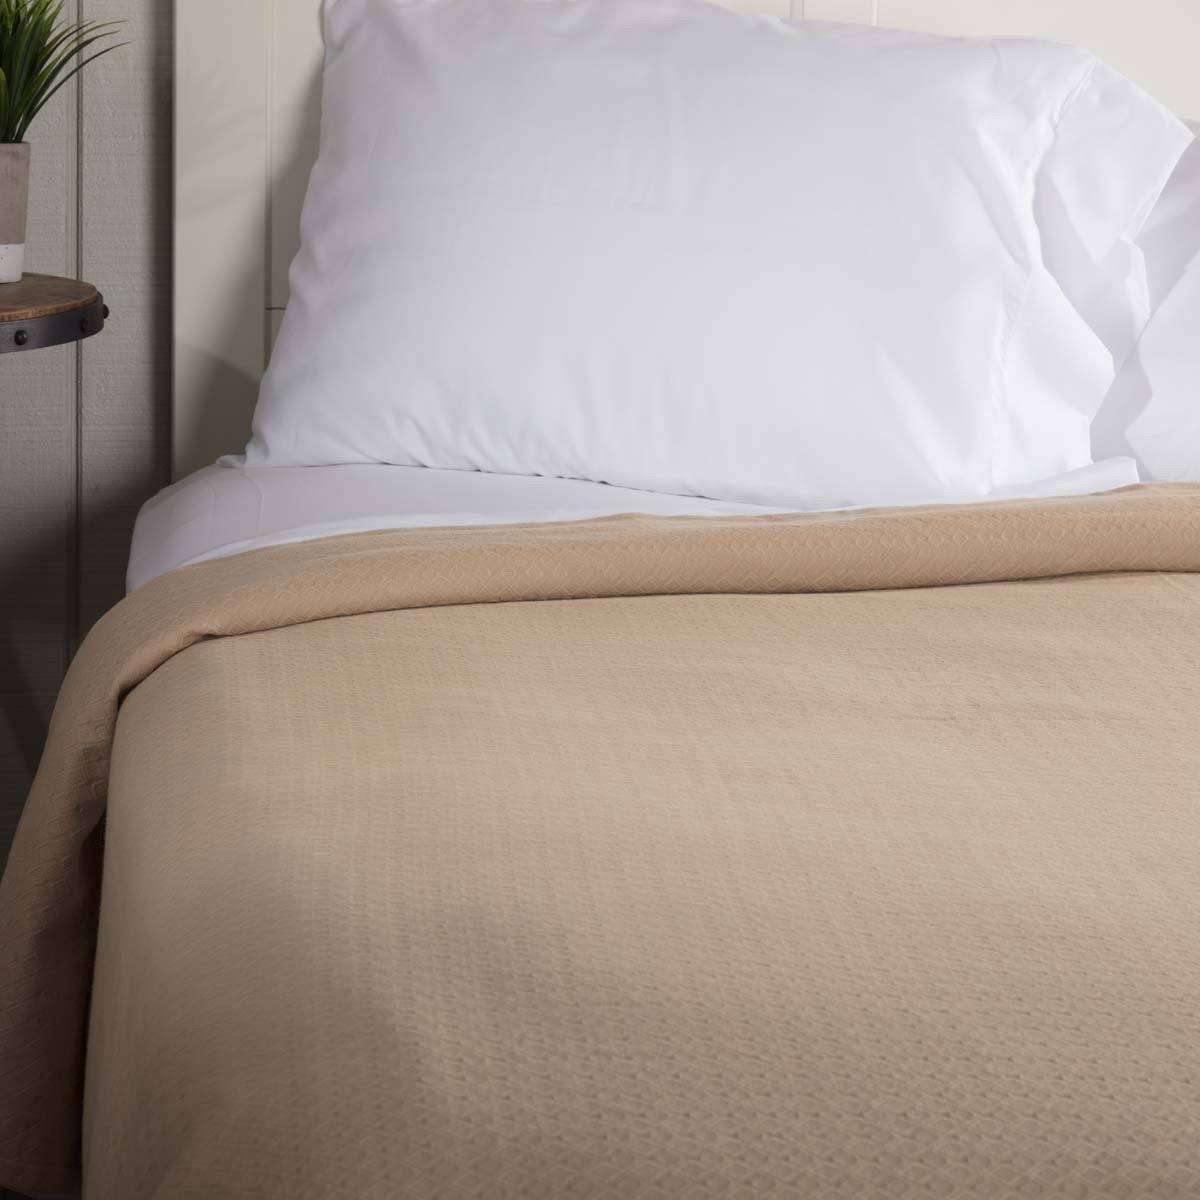 Serenity Tan Cotton Woven Blanket VHC Brands